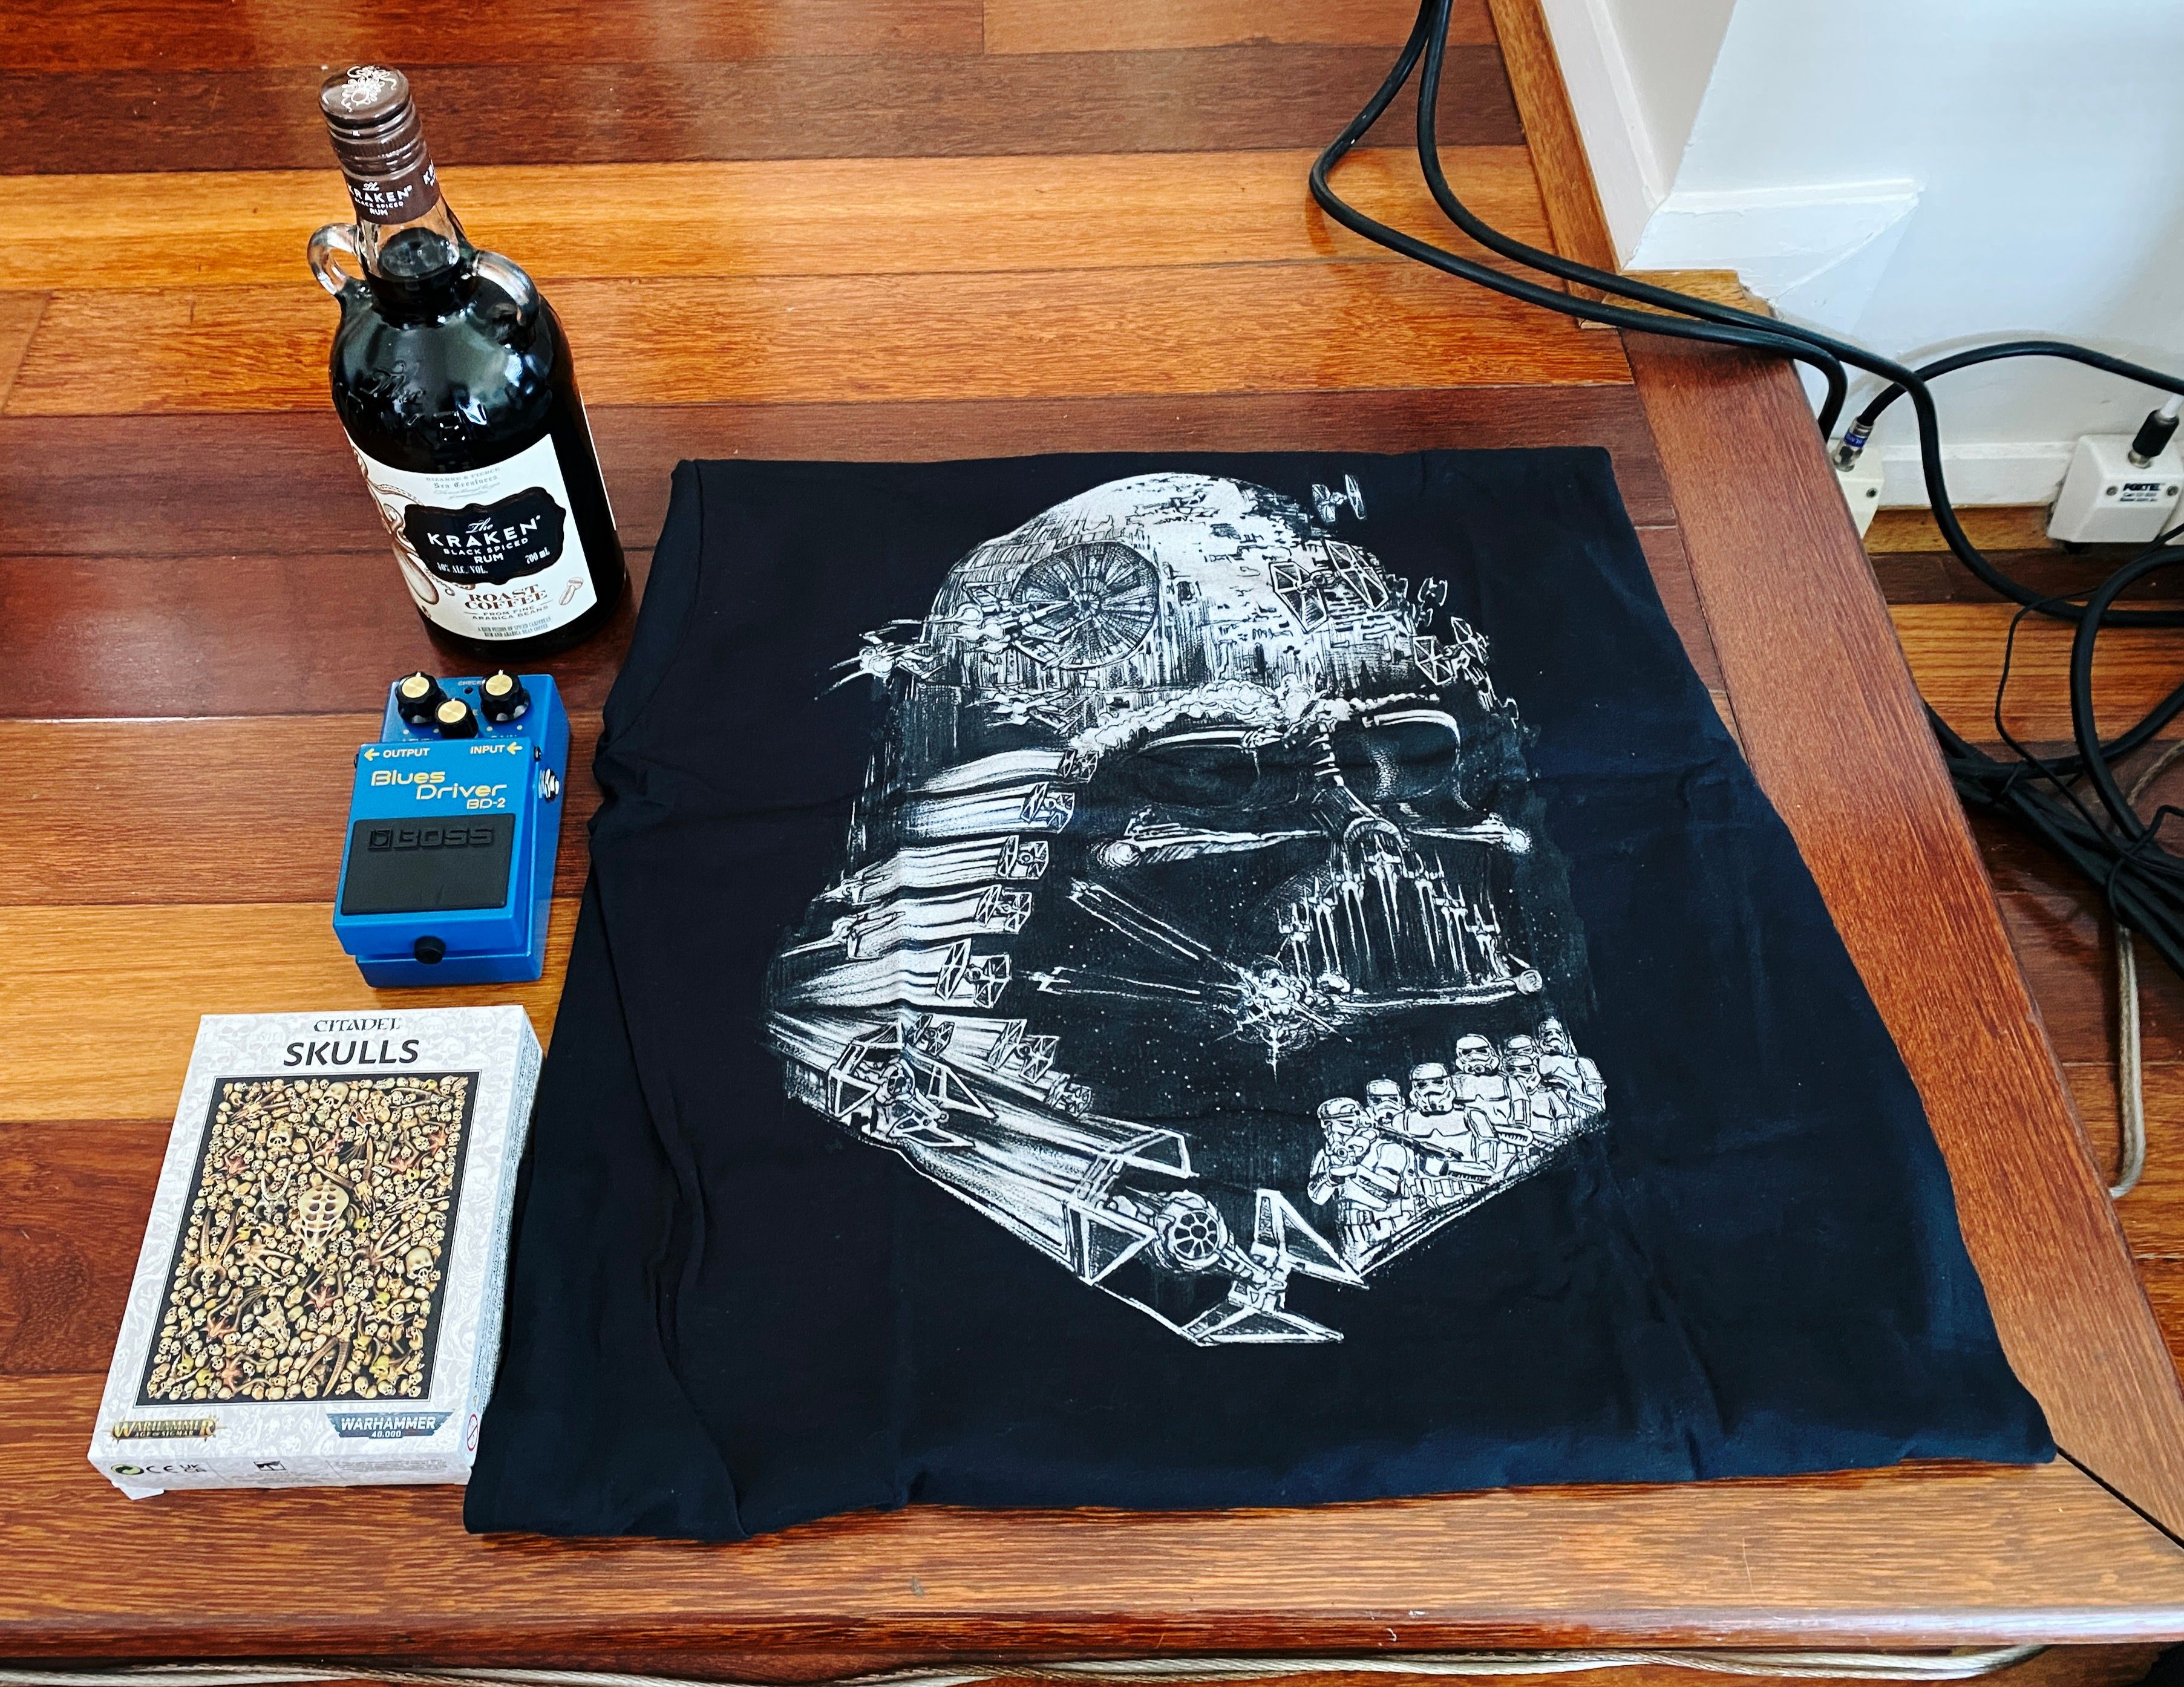 A photo of a bottle of Kraken spiced roast coffee rum, a Boss "Blues Driver" guitar pedal, a box of 300 miniature skulls for decorating my various Games Workshop miniature bases, and a black t-shirt with a dark on the front that looks like Darth Vader but he's made up of the Death Star and Storm Troopers and TIE Fighters.